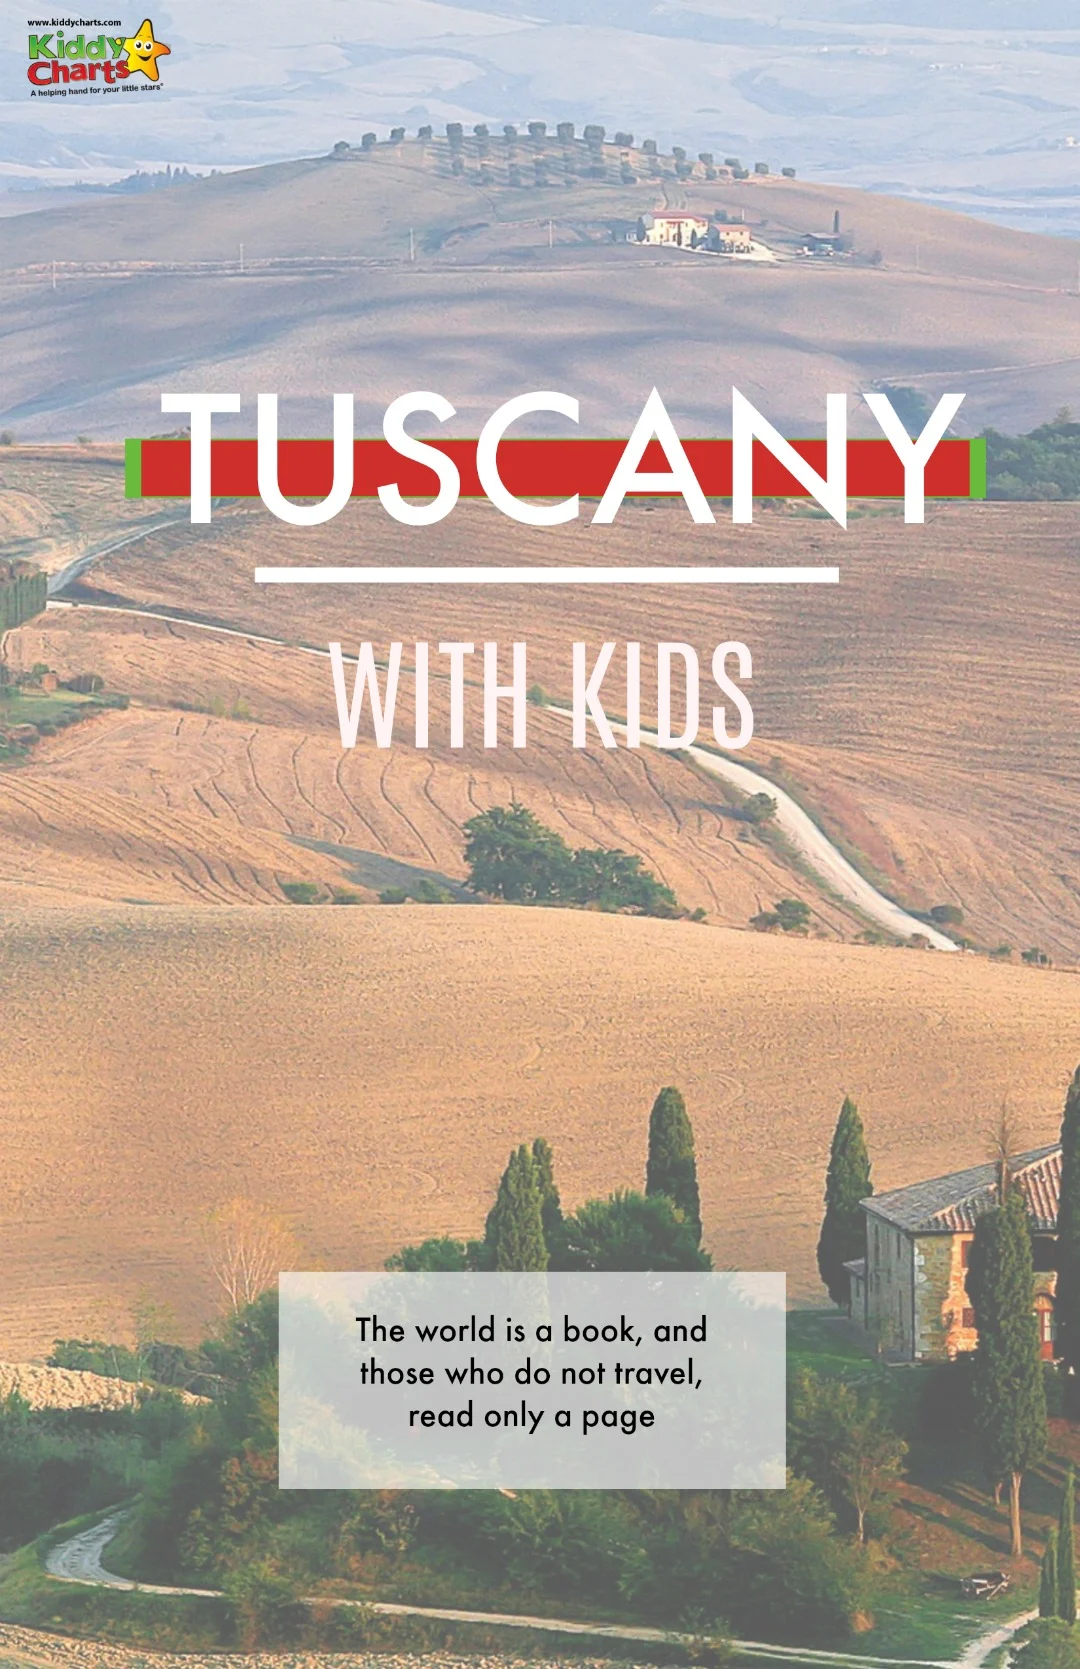 Are you looking to go to Tuscany with kids - we've got FIVE great ideas for what you can do! #familytravel #tuscany #kidstravel